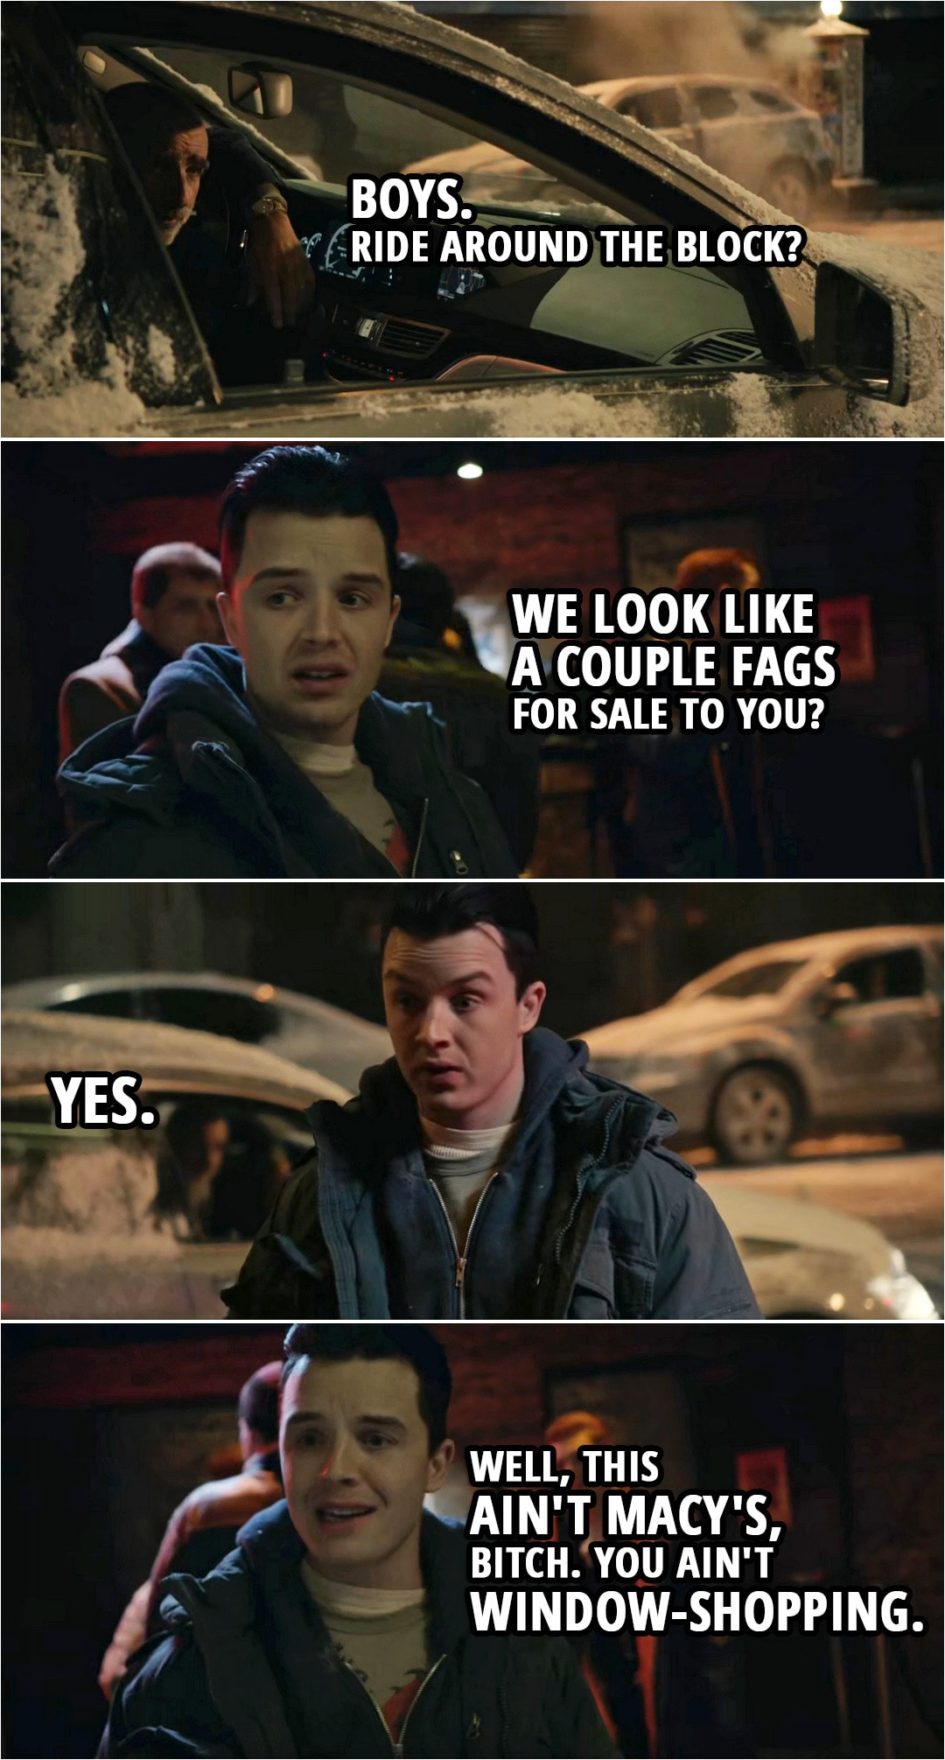 Quote from Shameless 4x09 | (Car stops in front of the club where Mickey and Ian are talking...) Man: Boys. Ride around the block? Mickey Milkovich: We look like a couple fags for sale to you? Man: Yes. Mickey Milkovich: Well, this ain't Macy's, b*tch. You ain't window-shopping.